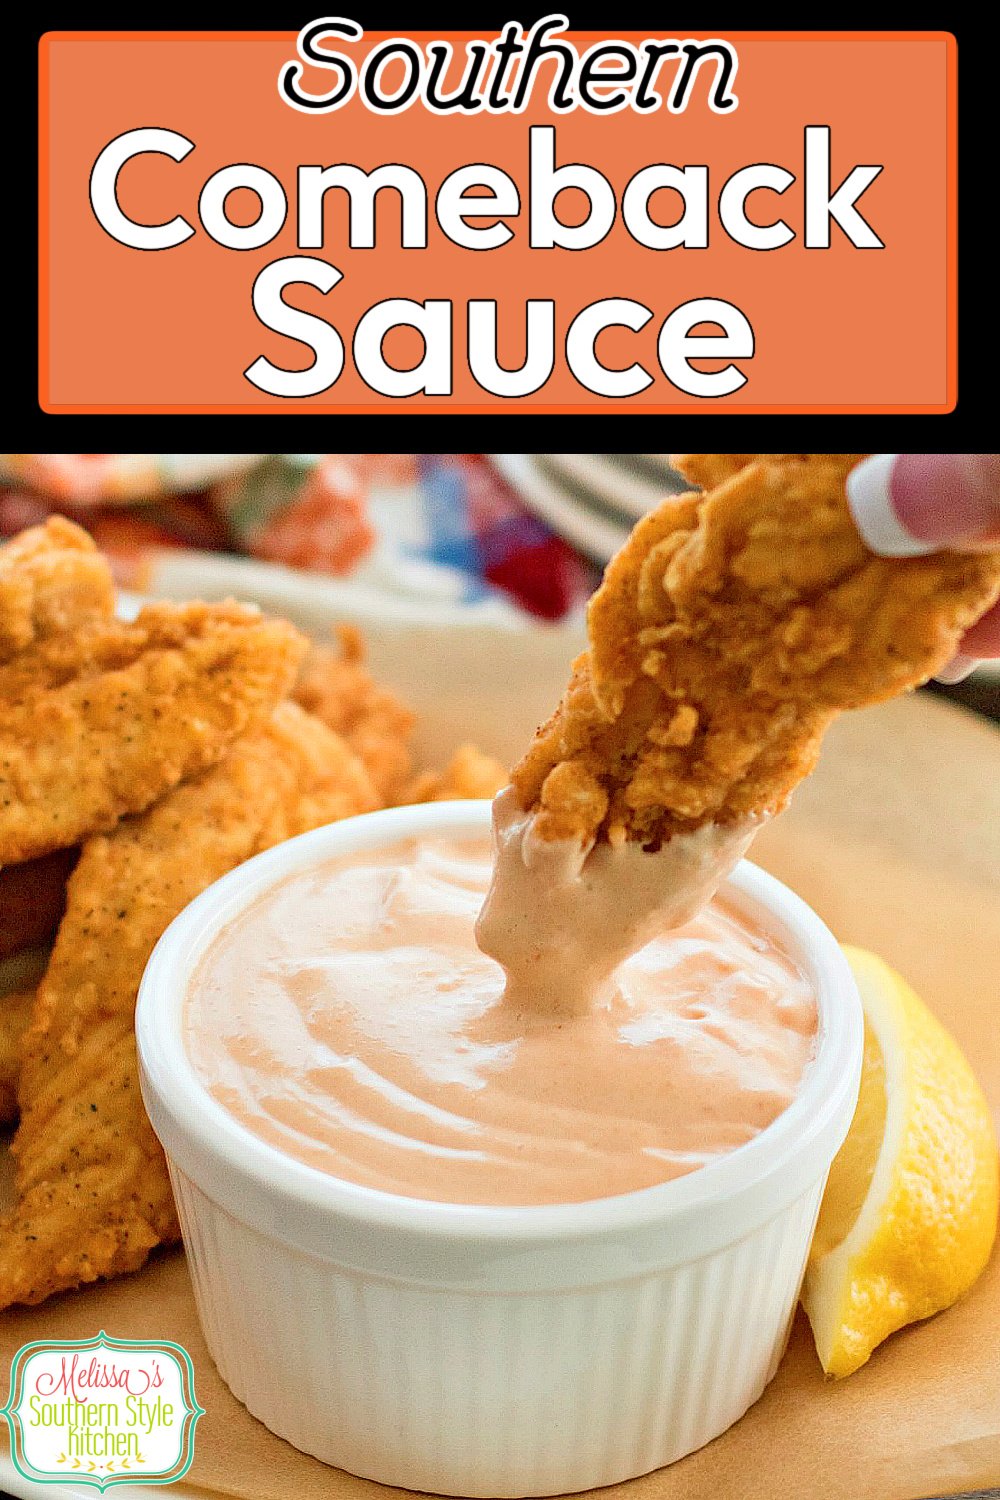 Enjoy this Comeback Sauce as a dip for chicken, fries, vegetables and beyond! #comebacksauce #frysauce #diprecipes #dips #appetizers #easyrecipes #southerncomebacksauce #southernrecipes #southernfood #appetizers via @melissasssk